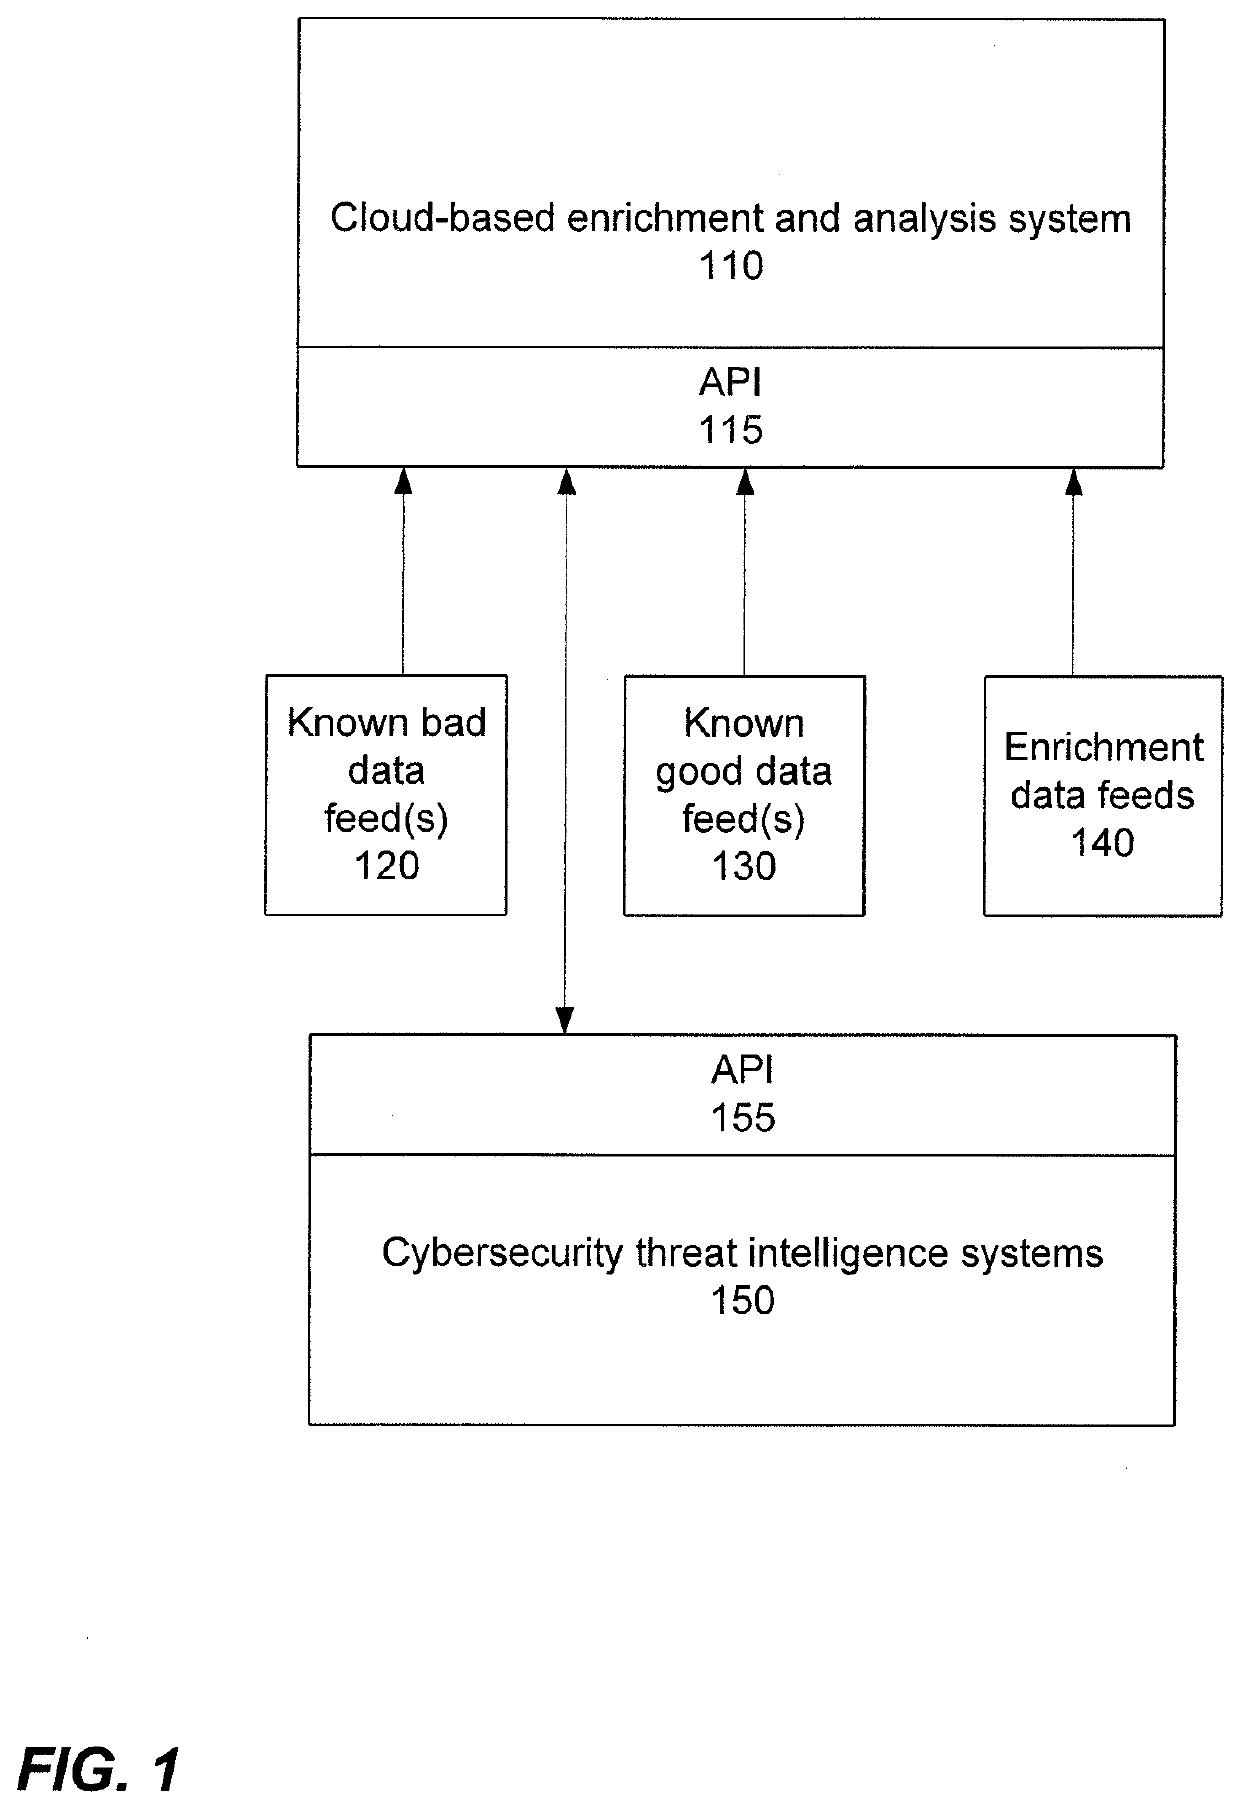 Enrichment and analysis of cybersecurity threat intelligence and orchestrating application of threat intelligence to selected network security events